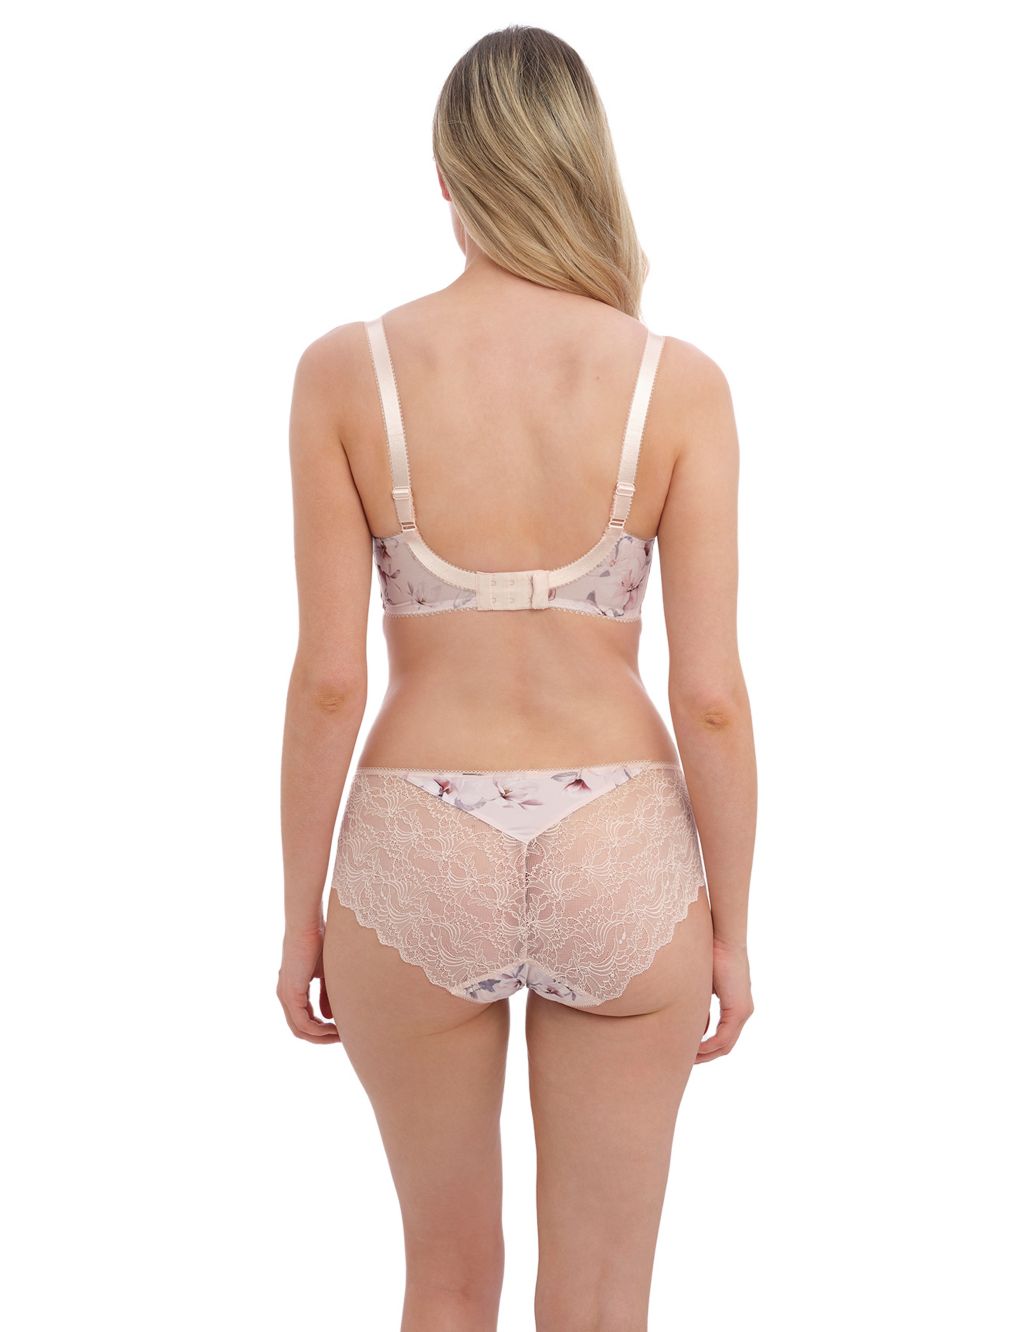 Lucia Lace Floral Knicker Shorts image 2